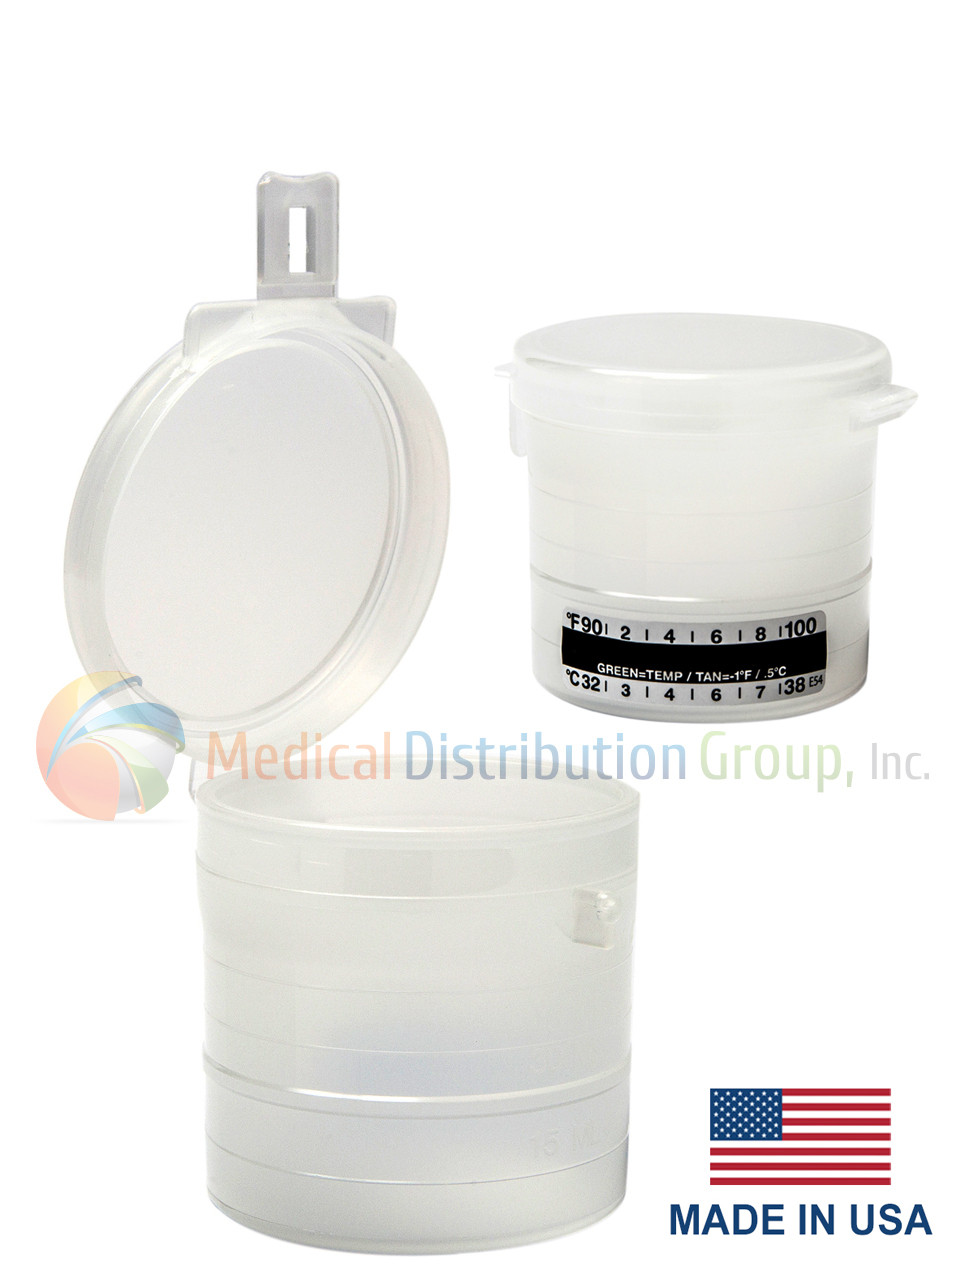 https://cdn11.bigcommerce.com/s-5b25a/images/stencil/1280x1280/products/1271/4623/capitol-vial-flip-top-snap-lid-urine-collection-cups-90-ML-non-sterile-medical-distribution-group-2021__48804.1627293425.jpg?c=2